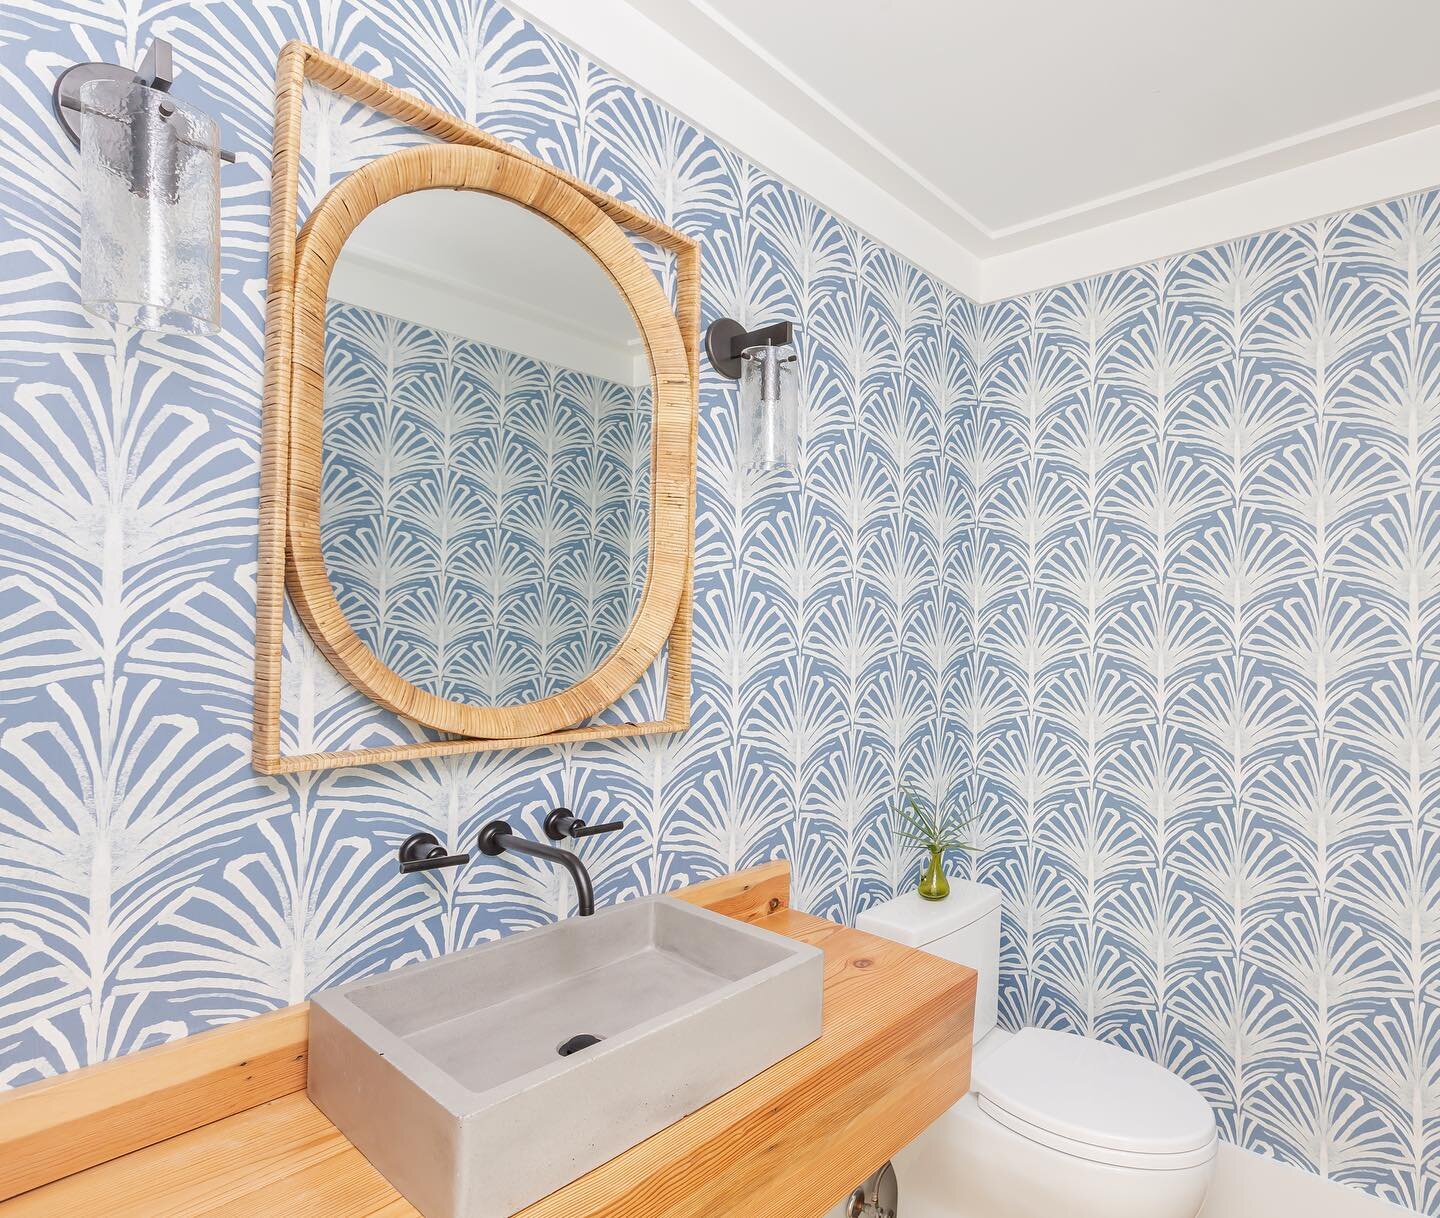 Absolutely adore the way this wallpaper turned out in the powder room of our Spartina project 💙😍💙 the blue walls mixed with warm wood and rattan are the prefect combo for this coastal home. Photography credit goes to @calliecocreative #indigoalley